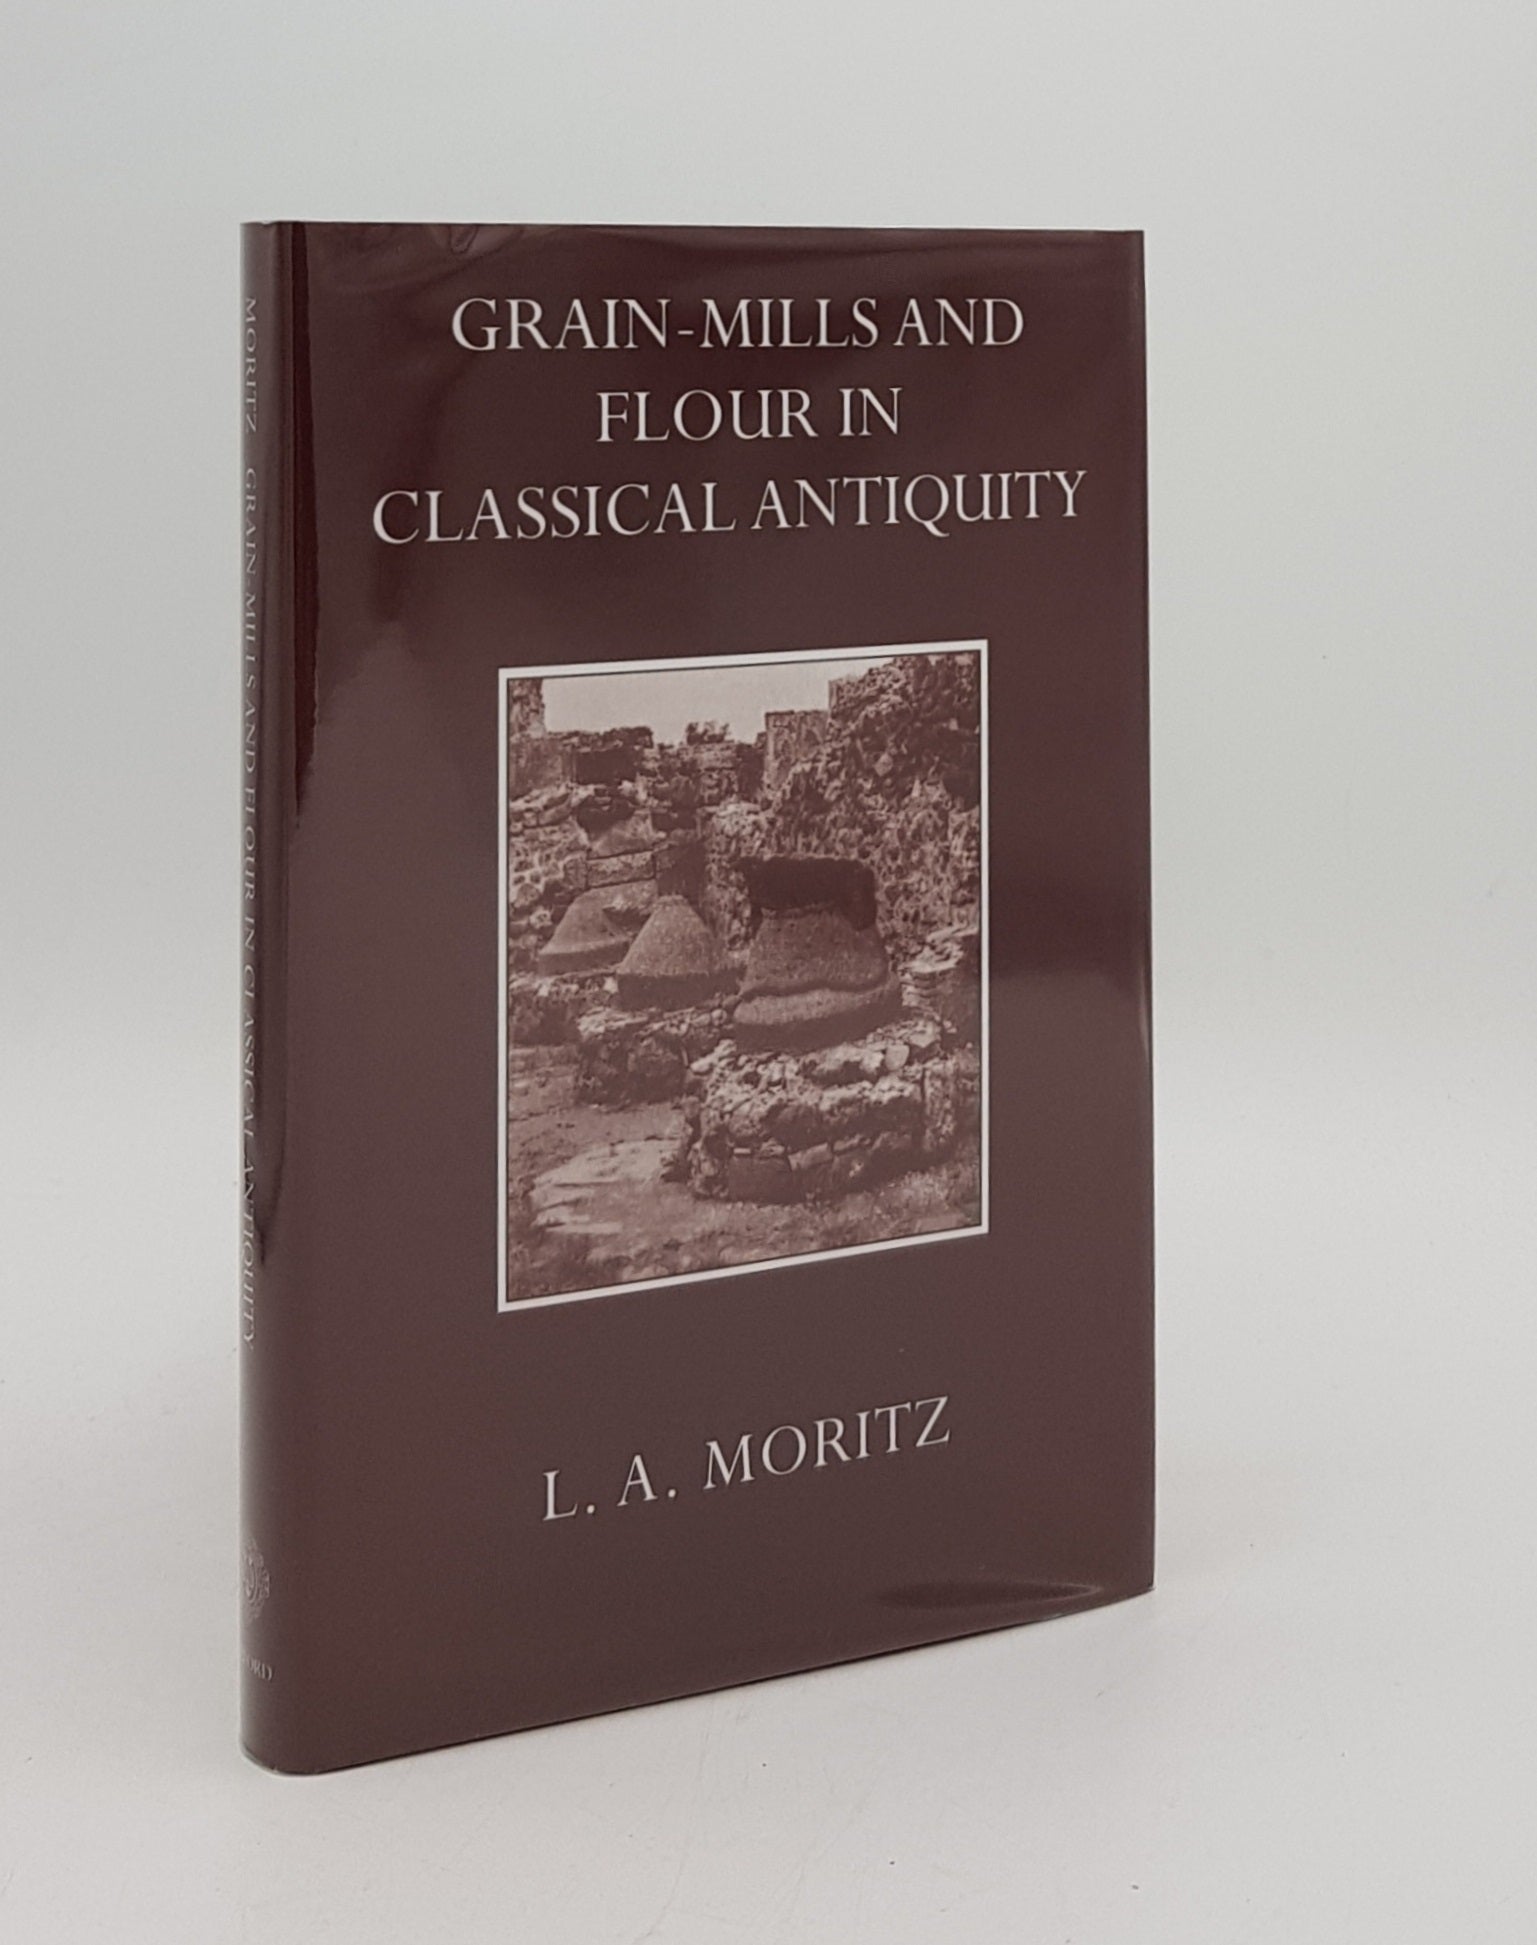 MORITZ L.A. - Grain-Mills and Flour in Classical Antiquity